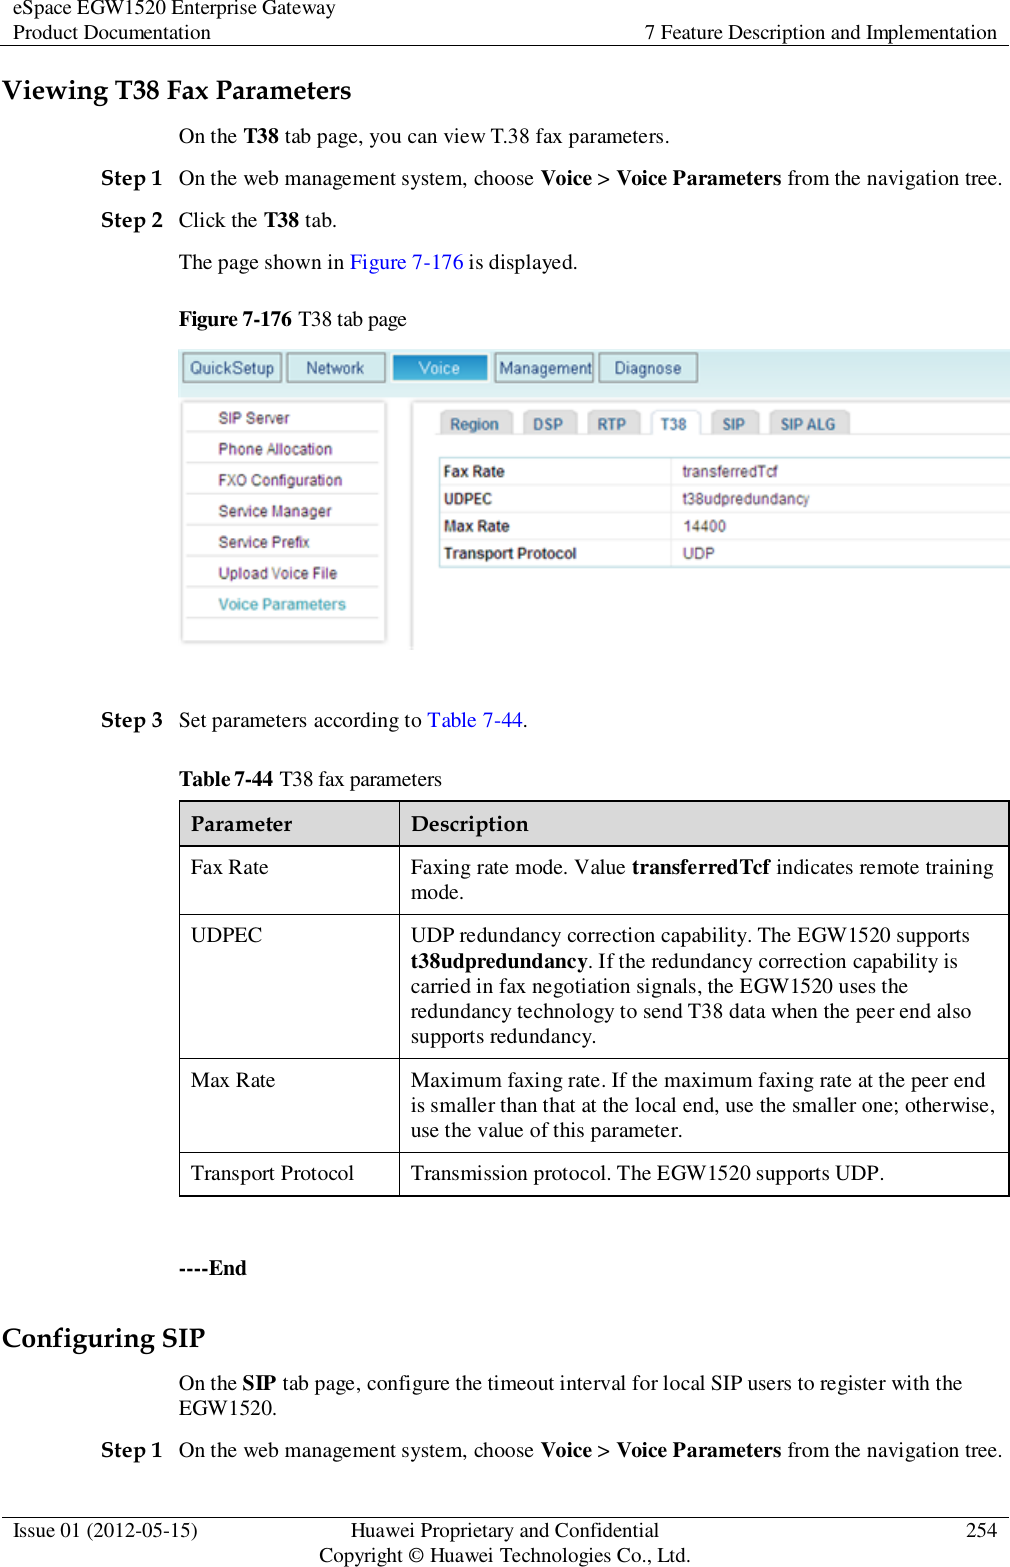 eSpace EGW1520 Enterprise Gateway Product Documentation 7 Feature Description and Implementation  Issue 01 (2012-05-15) Huawei Proprietary and Confidential                                     Copyright © Huawei Technologies Co., Ltd. 254  Viewing T38 Fax Parameters On the T38 tab page, you can view T.38 fax parameters. Step 1 On the web management system, choose Voice &gt; Voice Parameters from the navigation tree. Step 2 Click the T38 tab. The page shown in Figure 7-176 is displayed. Figure 7-176 T38 tab page   Step 3 Set parameters according to Table 7-44. Table 7-44 T38 fax parameters Parameter Description Fax Rate Faxing rate mode. Value transferredTcf indicates remote training mode. UDPEC UDP redundancy correction capability. The EGW1520 supports t38udpredundancy. If the redundancy correction capability is carried in fax negotiation signals, the EGW1520 uses the redundancy technology to send T38 data when the peer end also supports redundancy. Max Rate Maximum faxing rate. If the maximum faxing rate at the peer end is smaller than that at the local end, use the smaller one; otherwise, use the value of this parameter. Transport Protocol Transmission protocol. The EGW1520 supports UDP.  ----End Configuring SIP On the SIP tab page, configure the timeout interval for local SIP users to register with the EGW1520. Step 1 On the web management system, choose Voice &gt; Voice Parameters from the navigation tree. 